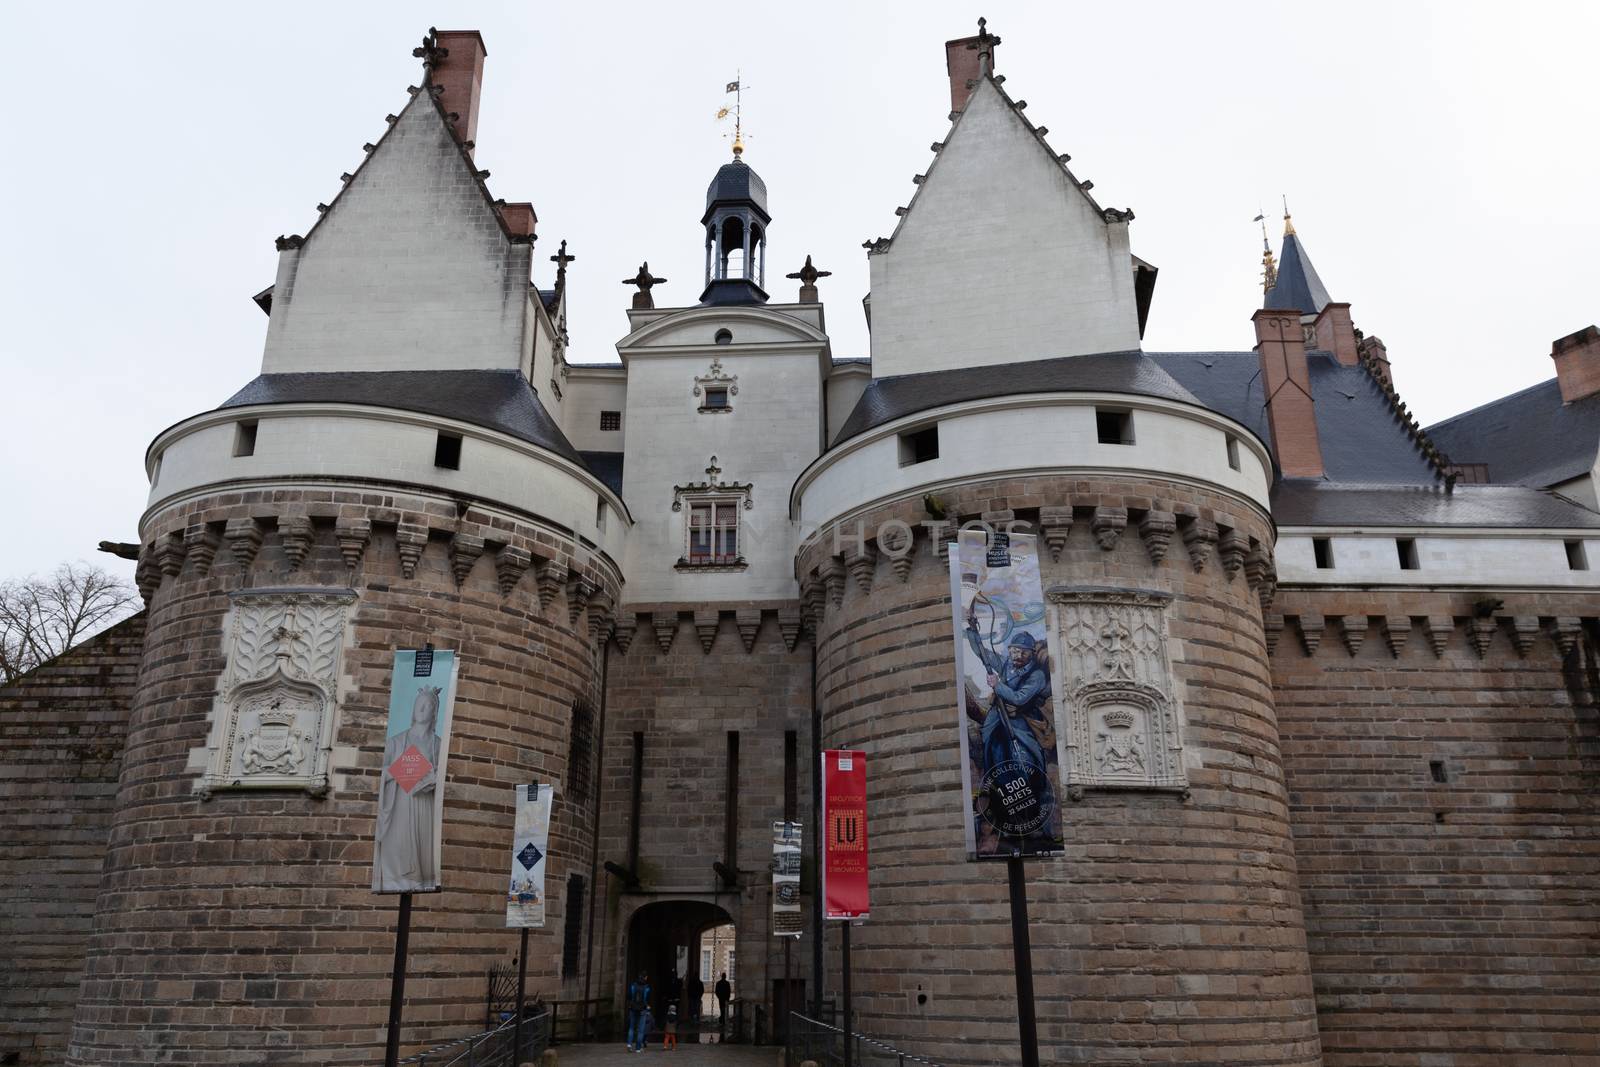 Nantes, France: 22 February 2020: Entrance to Castle of the Dukes of Brittany